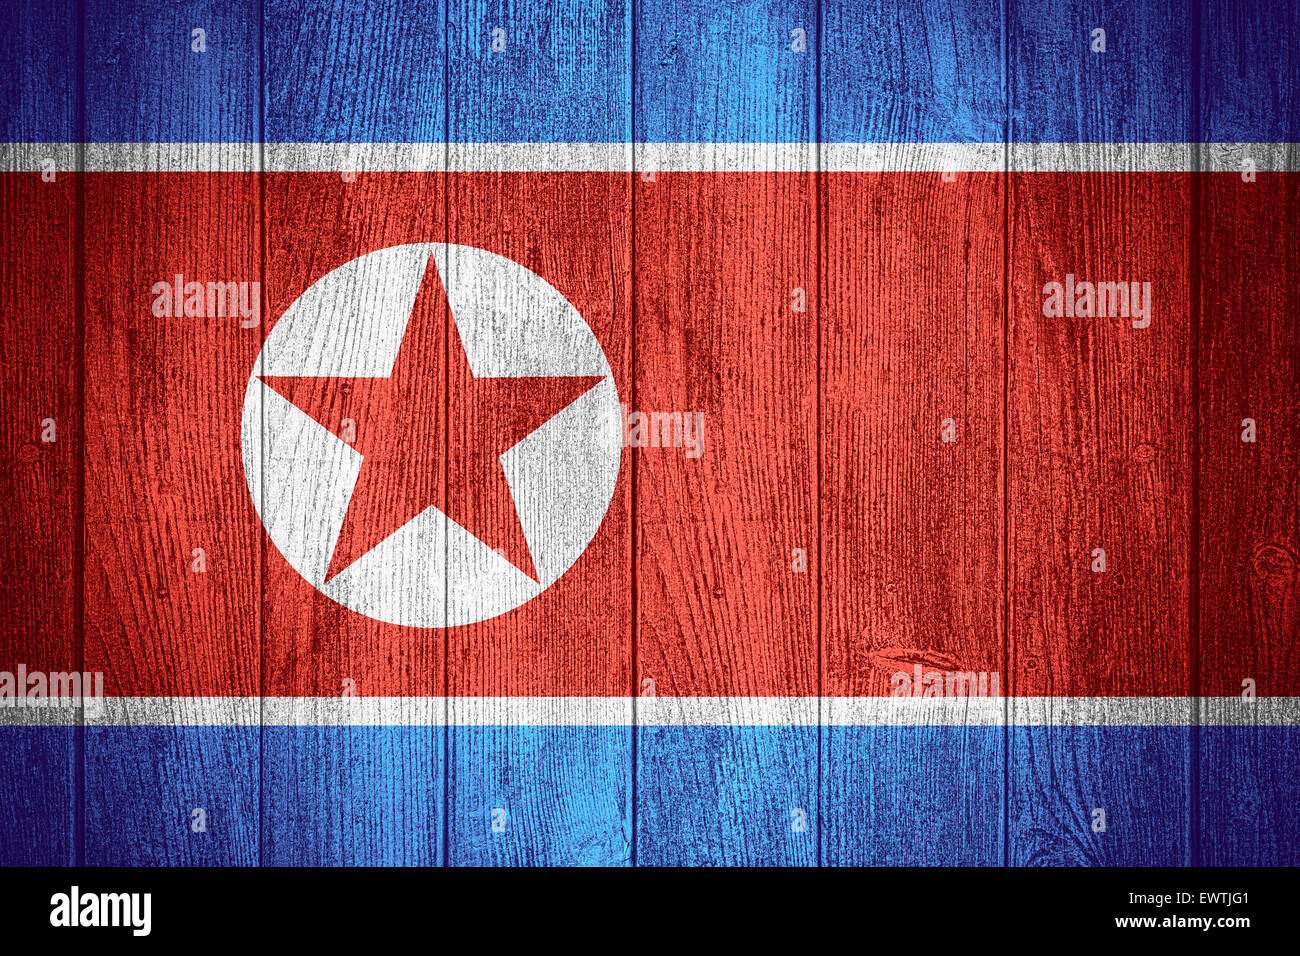 North Korea flag or North Korean banner on wooden boards background Stock Photo